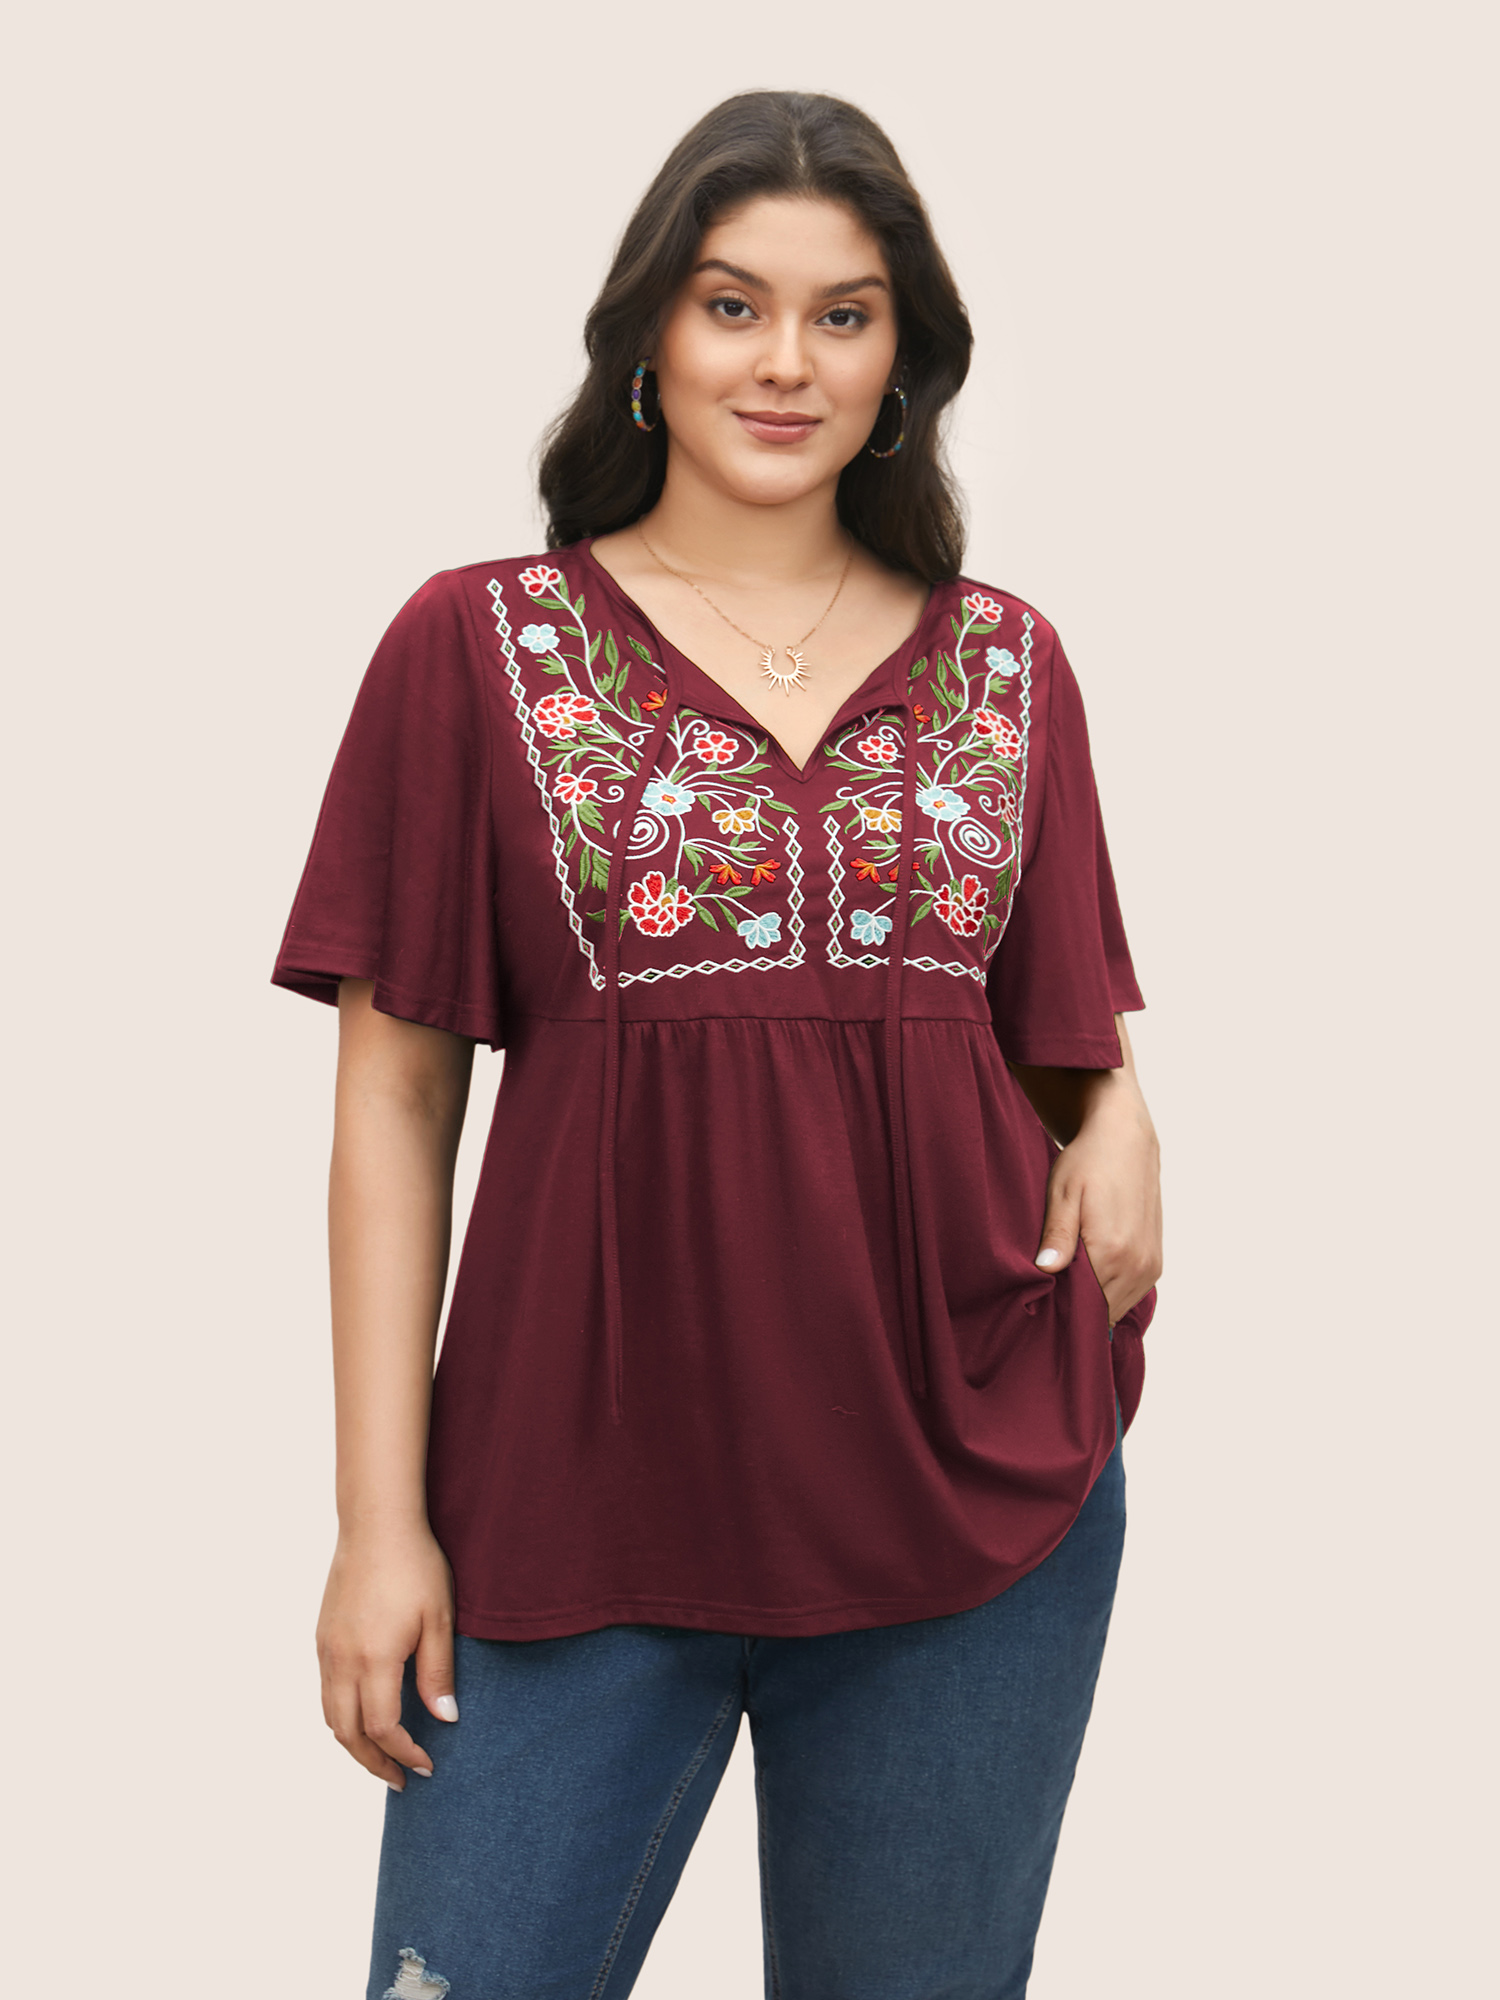 

Plus Size Floral Embroidered Tie Knot Gathered T-shirt Burgundy Women Resort Tie knot Heart neckline Vacation T-shirts BloomChic